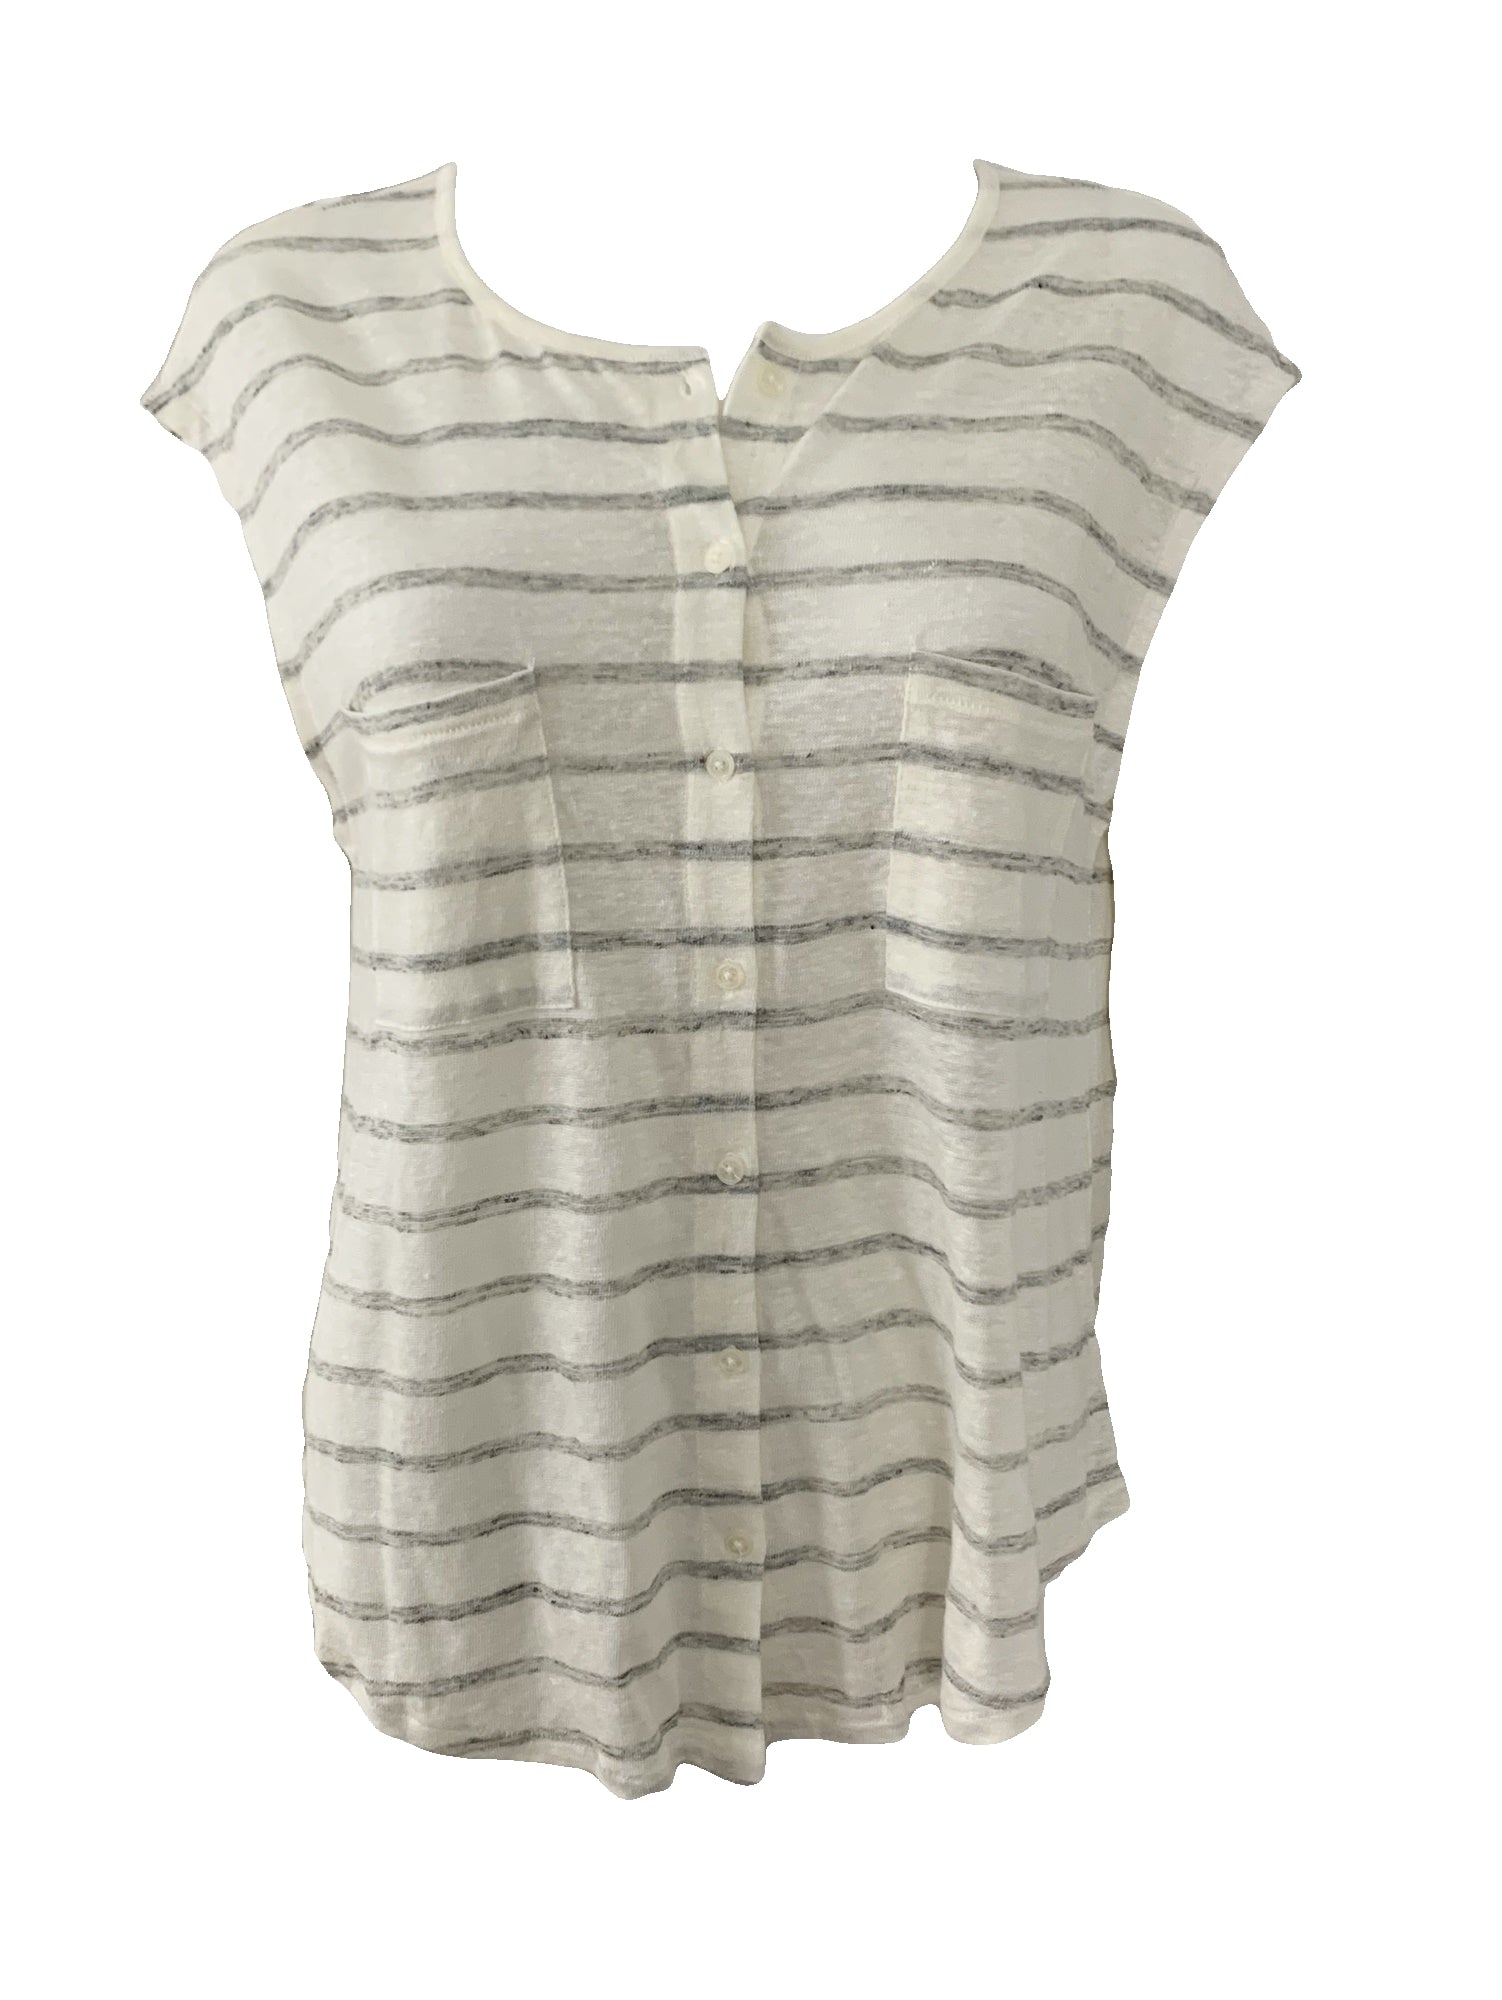 Striped Button Front Tee Size Medium